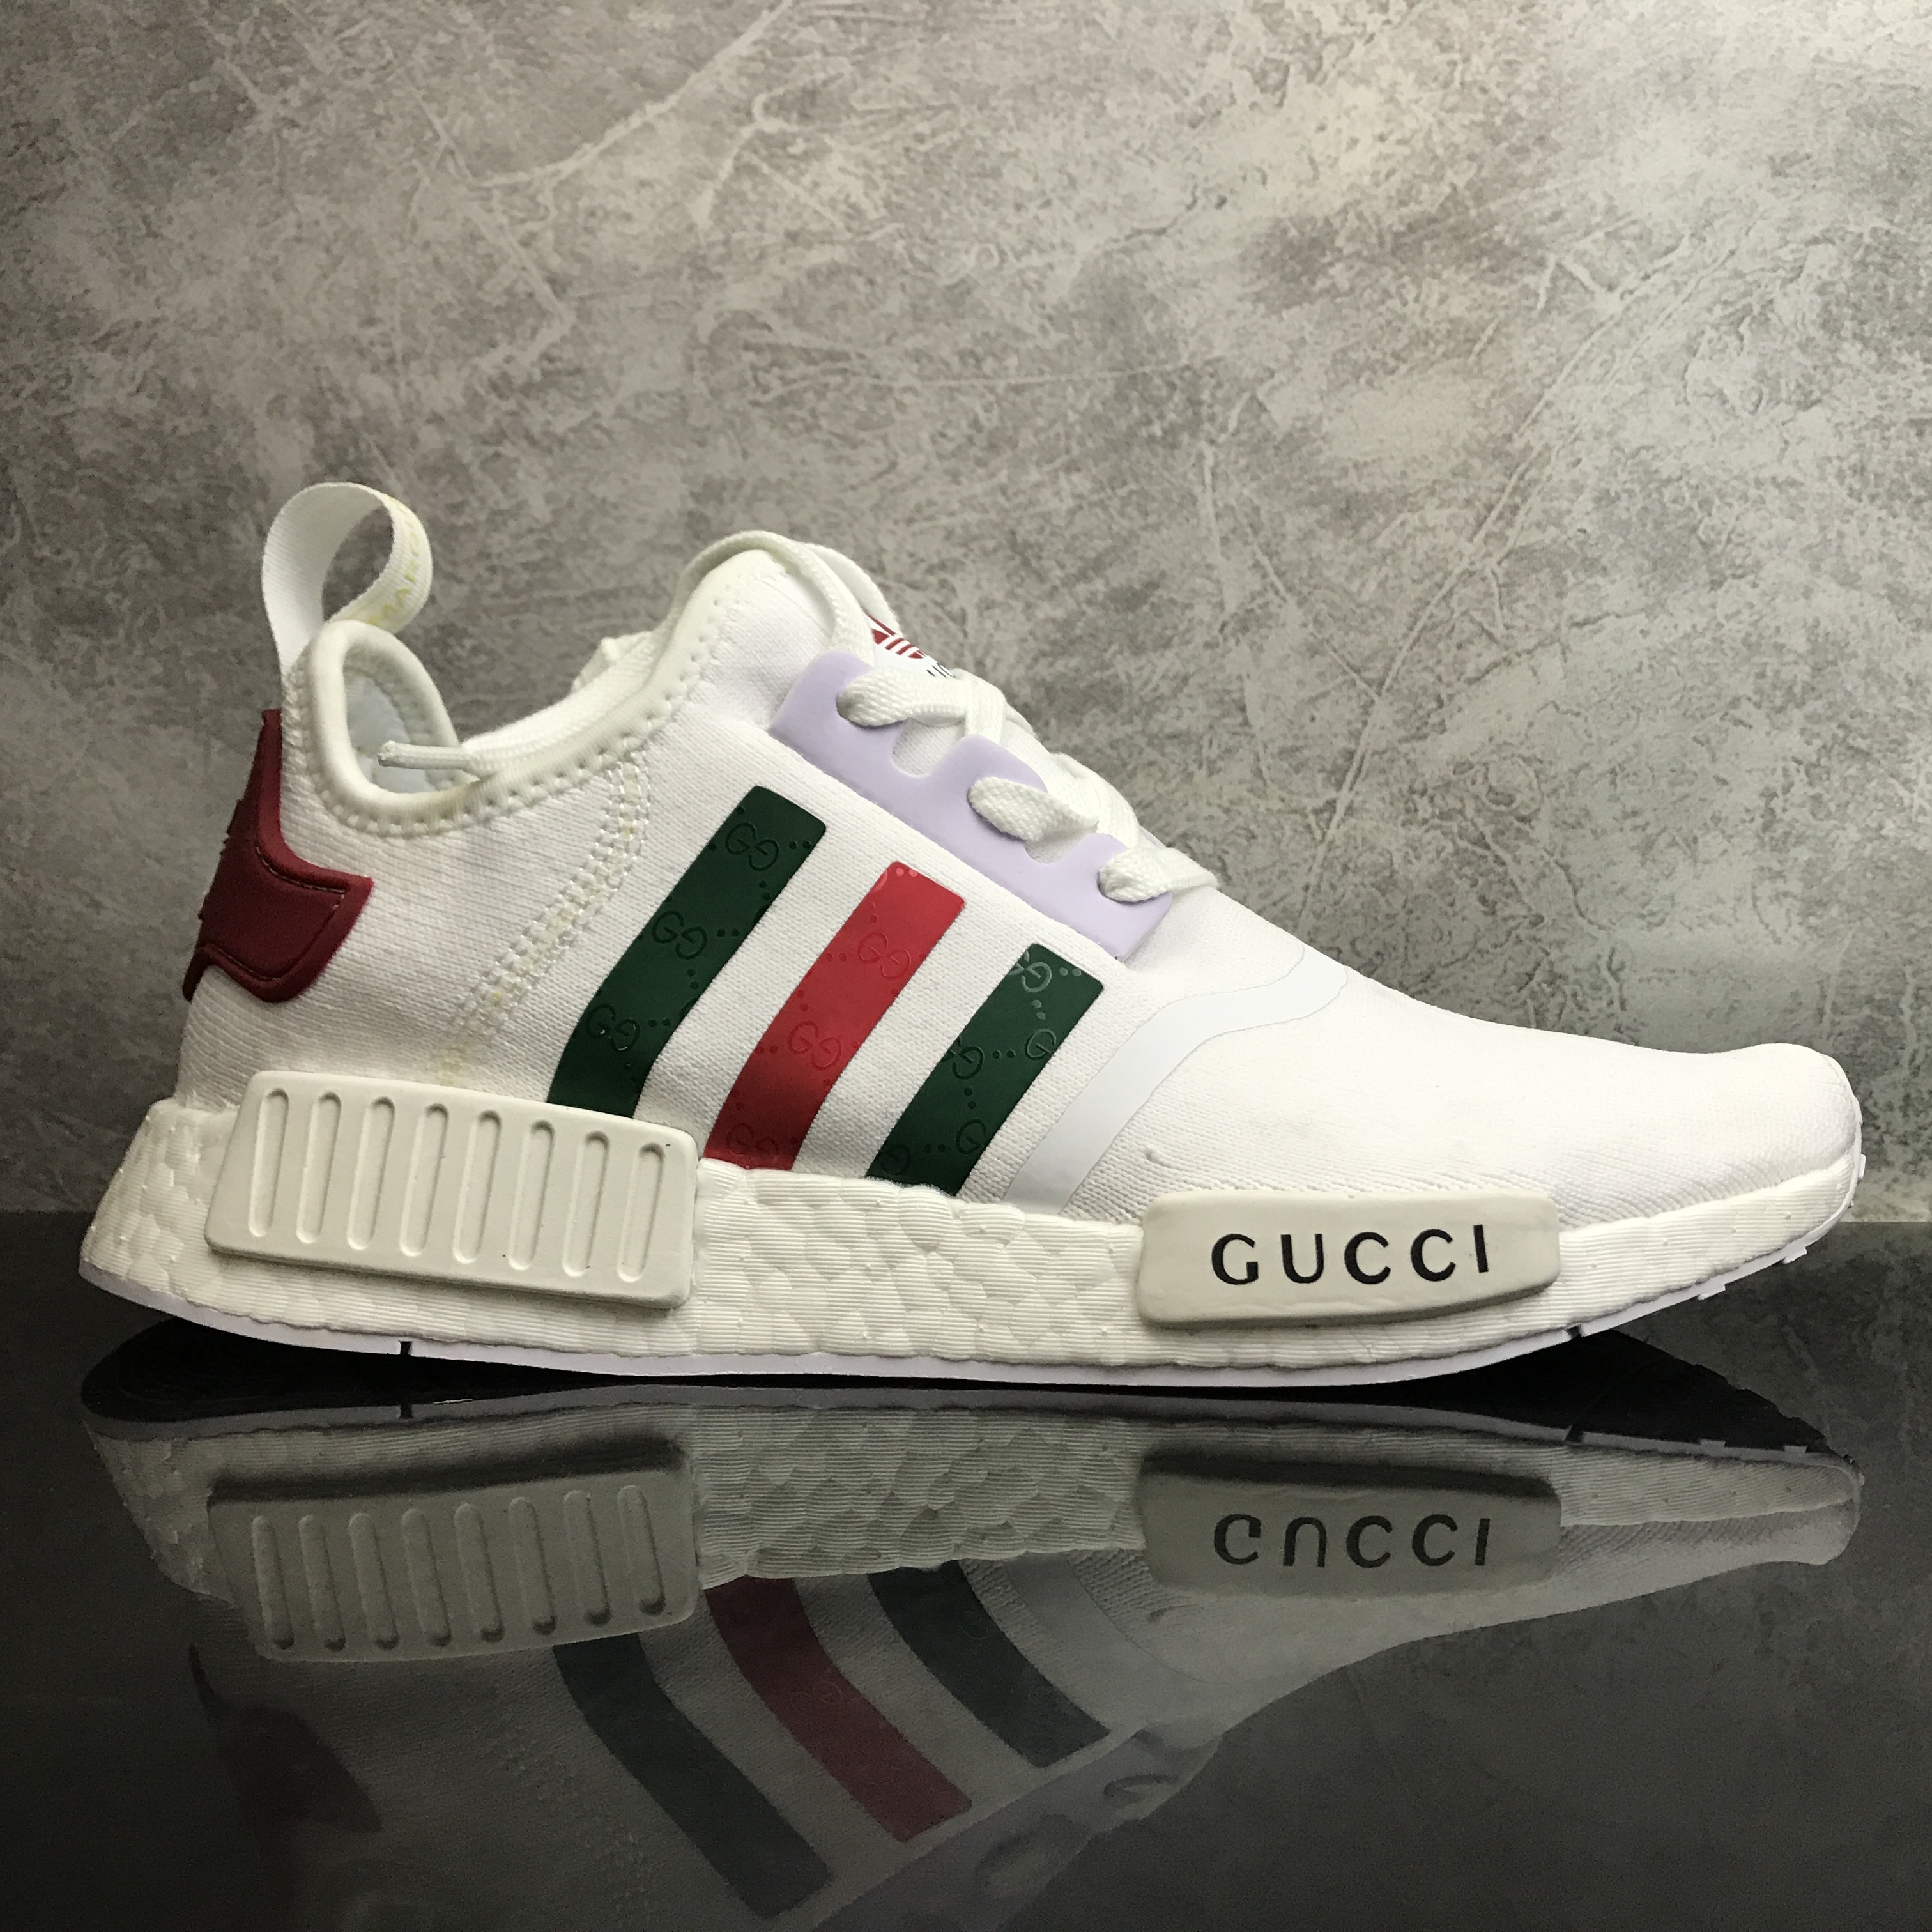 PREORDER Adidas NMD Gucci Inspired Shoes Preorders on